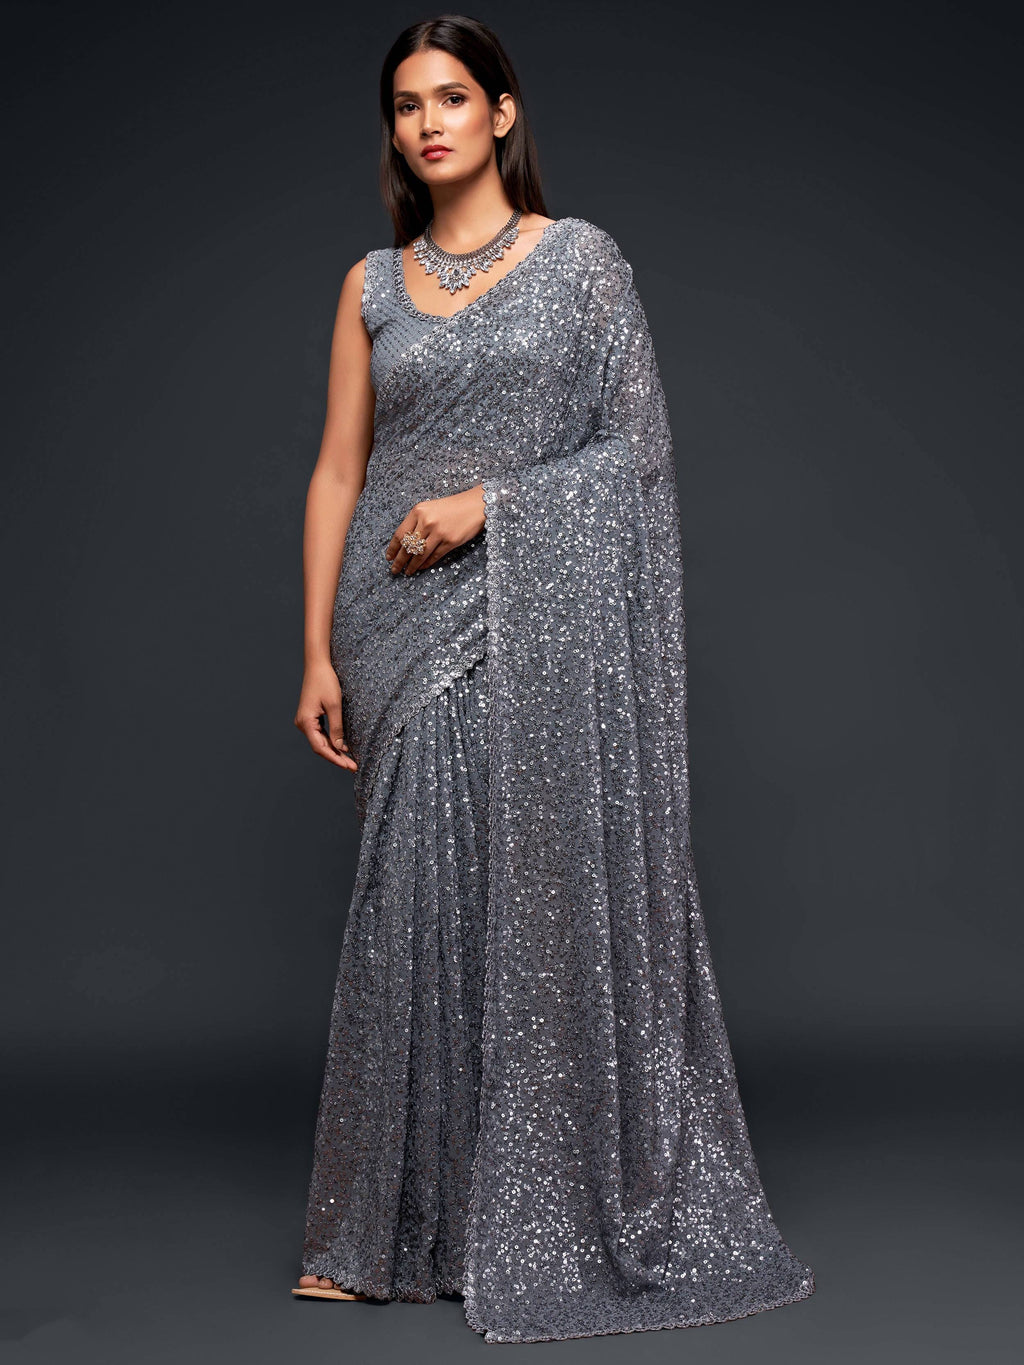 Grey Georgette Sequined Saree - Ria Fashions